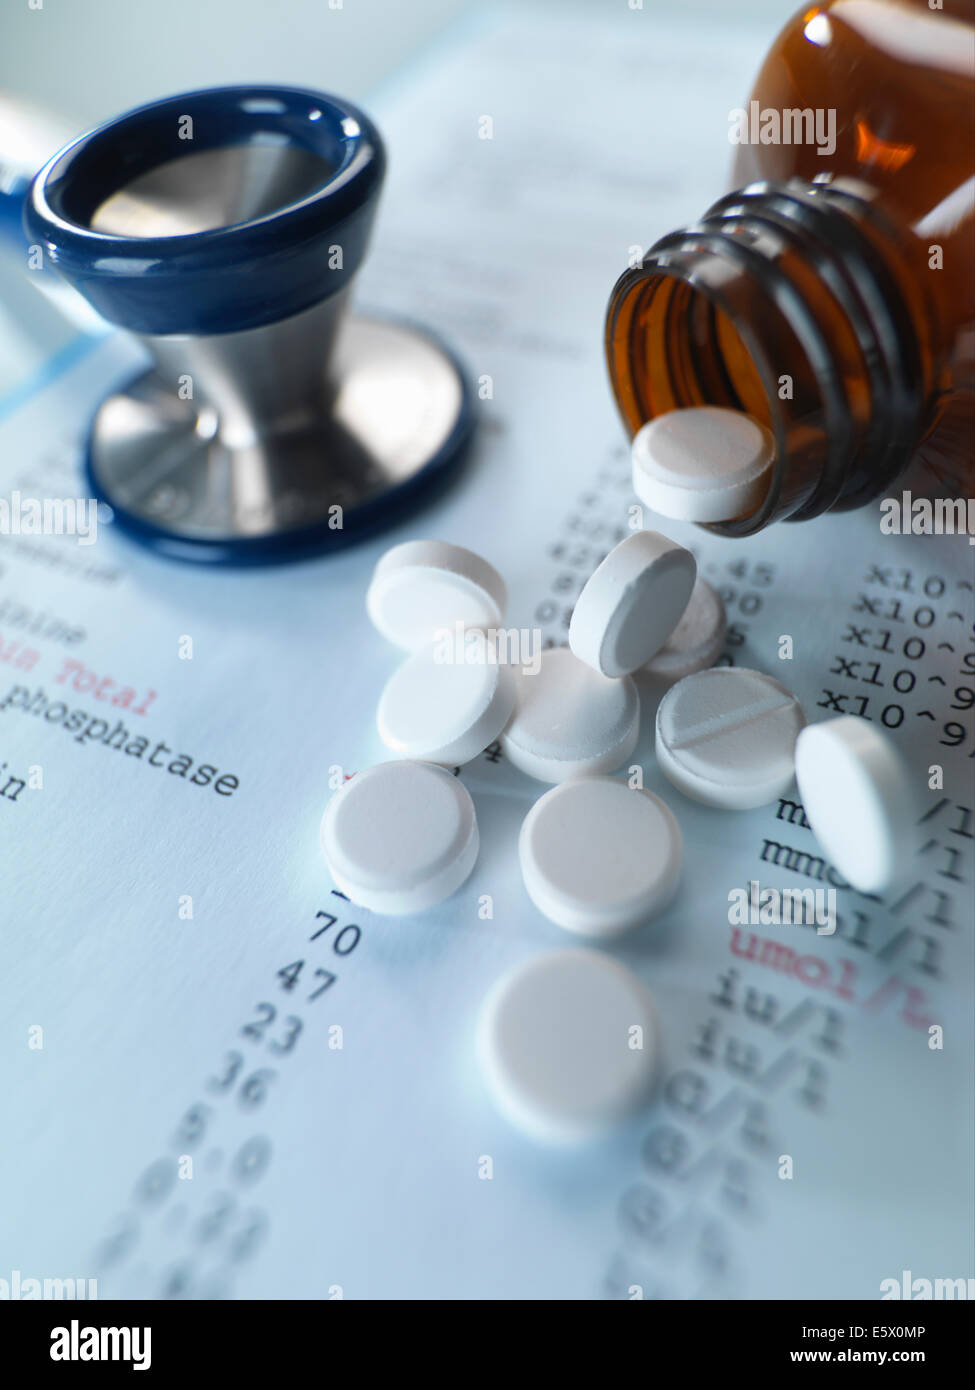 Stethoscope and pain killers pouring onto medical test results Stock Photo